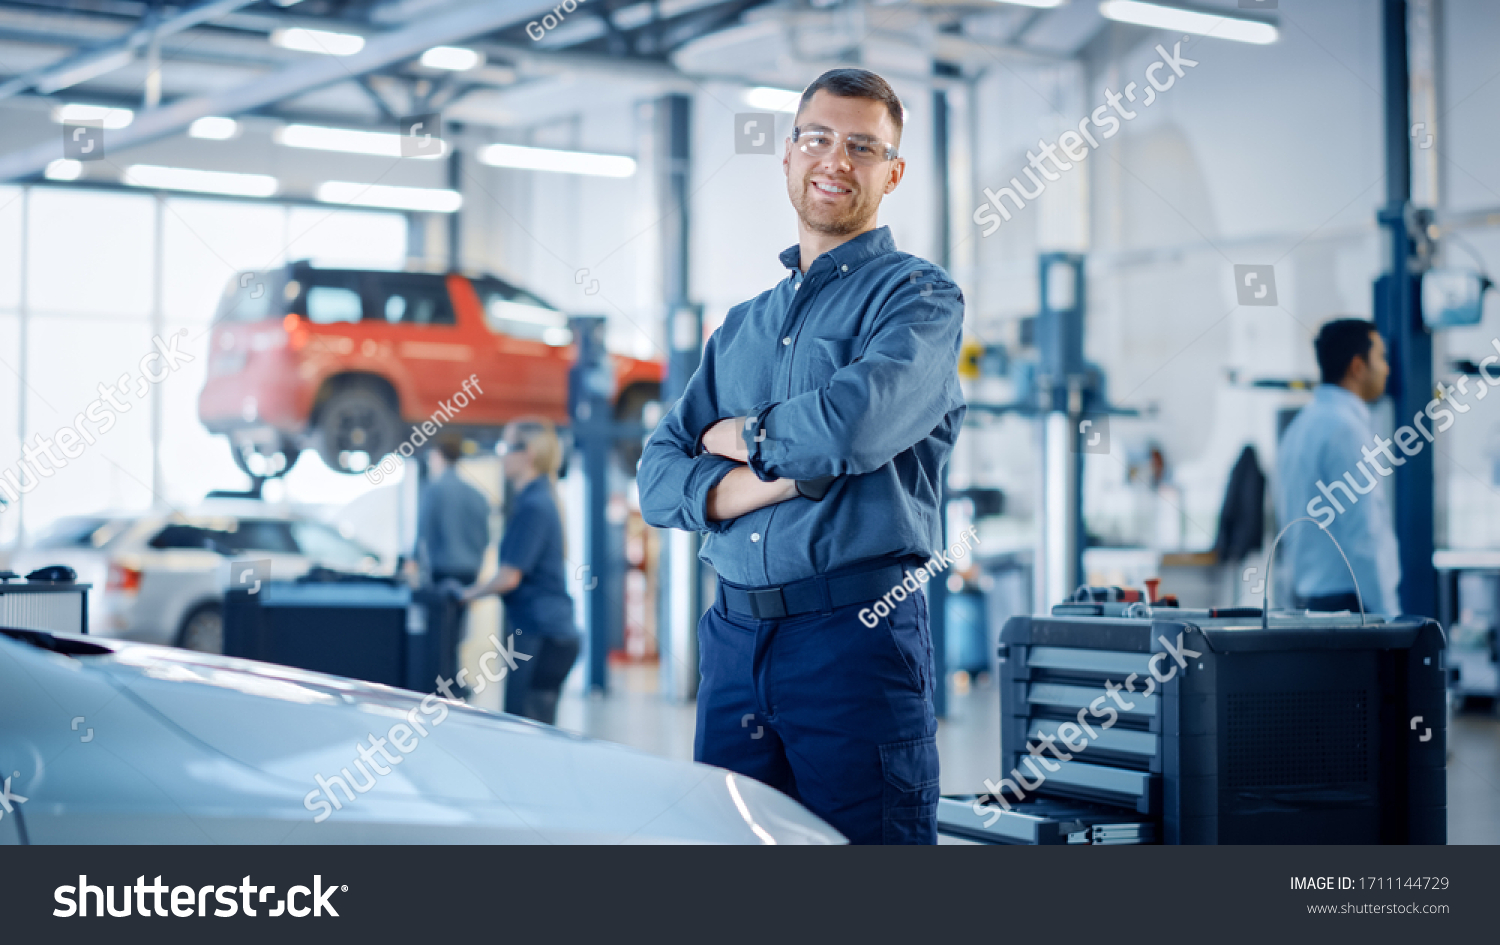 Handsome Car Mechanic is Posing in a Car Service. He Wears a Jeans Shirt and Safety Glasses. His Arms are Crossed. Specialist Looks at a Camera and Smiles. #1711144729